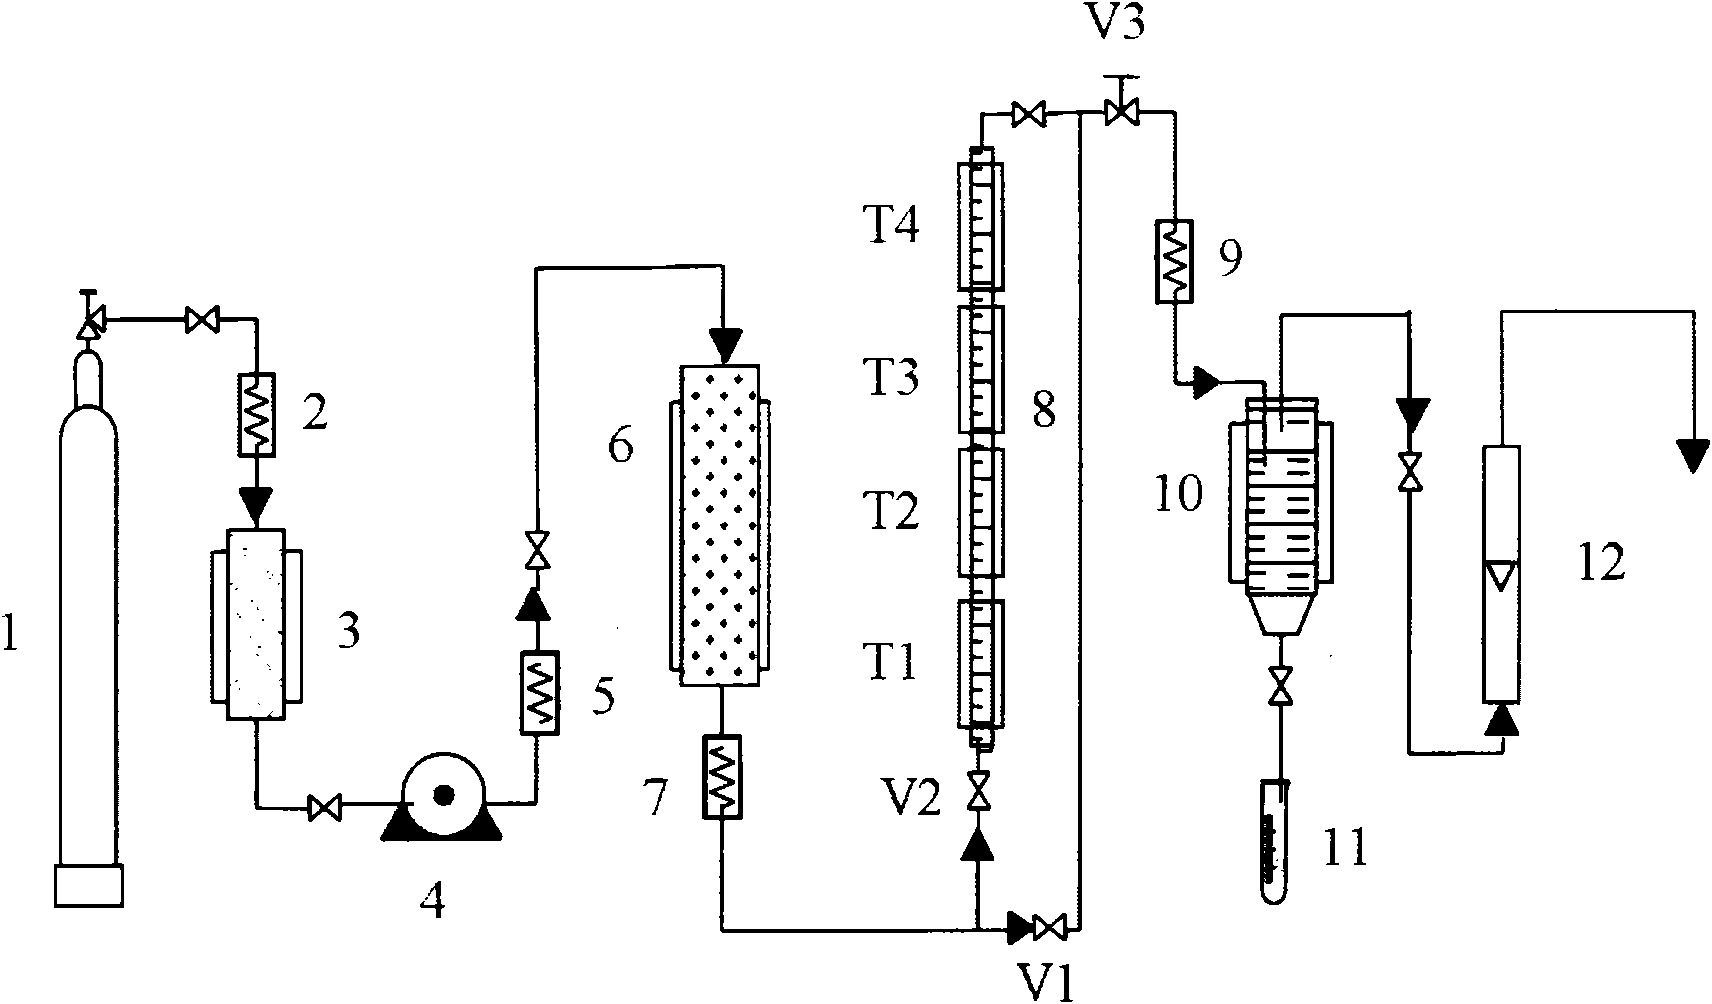 Method for preparing large-head atractylodes rhizome and sesquiterpene compound